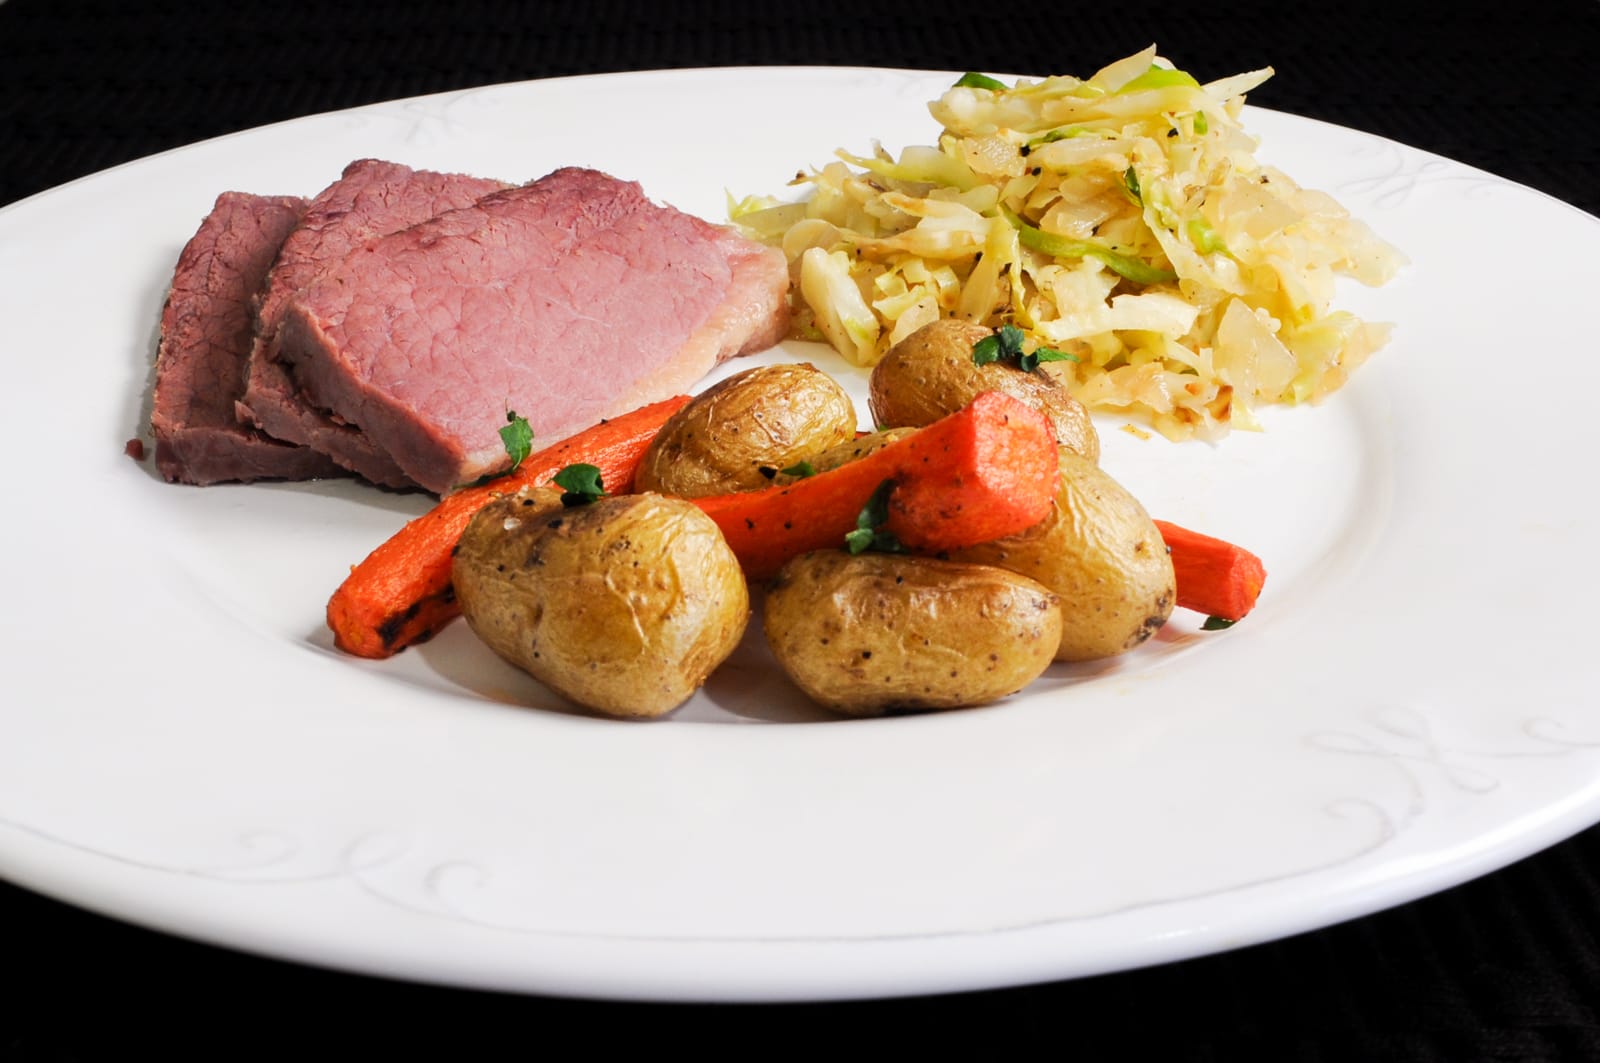 Boiled Corned Beef, Sautéed Cabbage & Onions, and Roasted Carrots & Potatoes